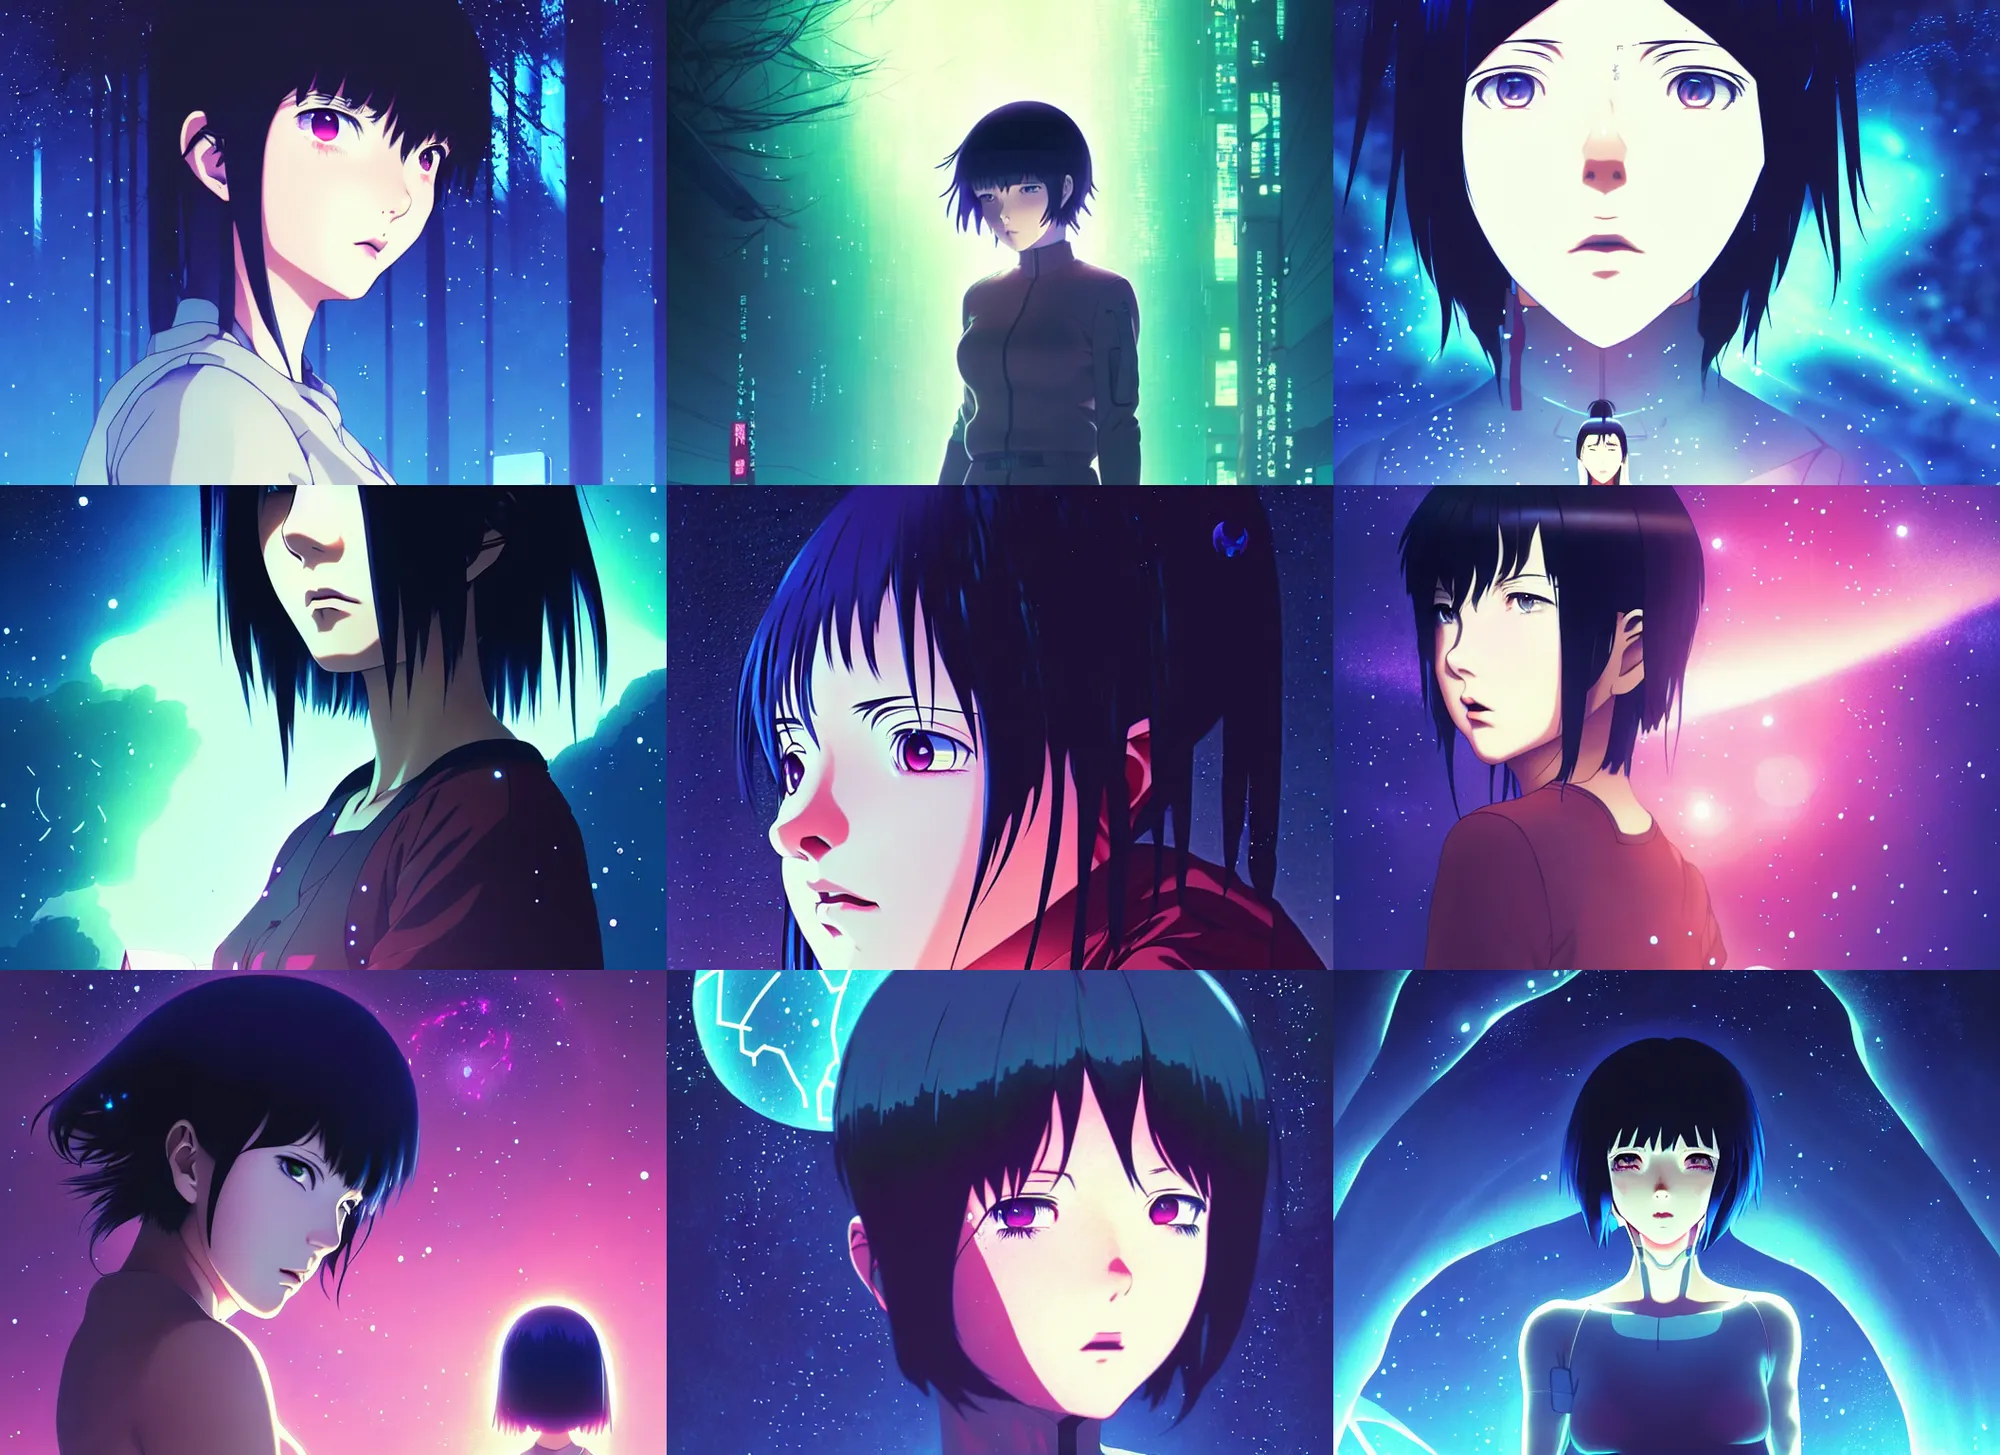 Prompt: ghost in the shell, anime key visual, young woman traveling in a forest at night, night sky, nebula, very dark, cute face by ilya kuvshinov, yoh yoshinari, dynamic pose, dynamic perspective, rounded eyes, kyoani, smooth facial features, dramatic lighting,